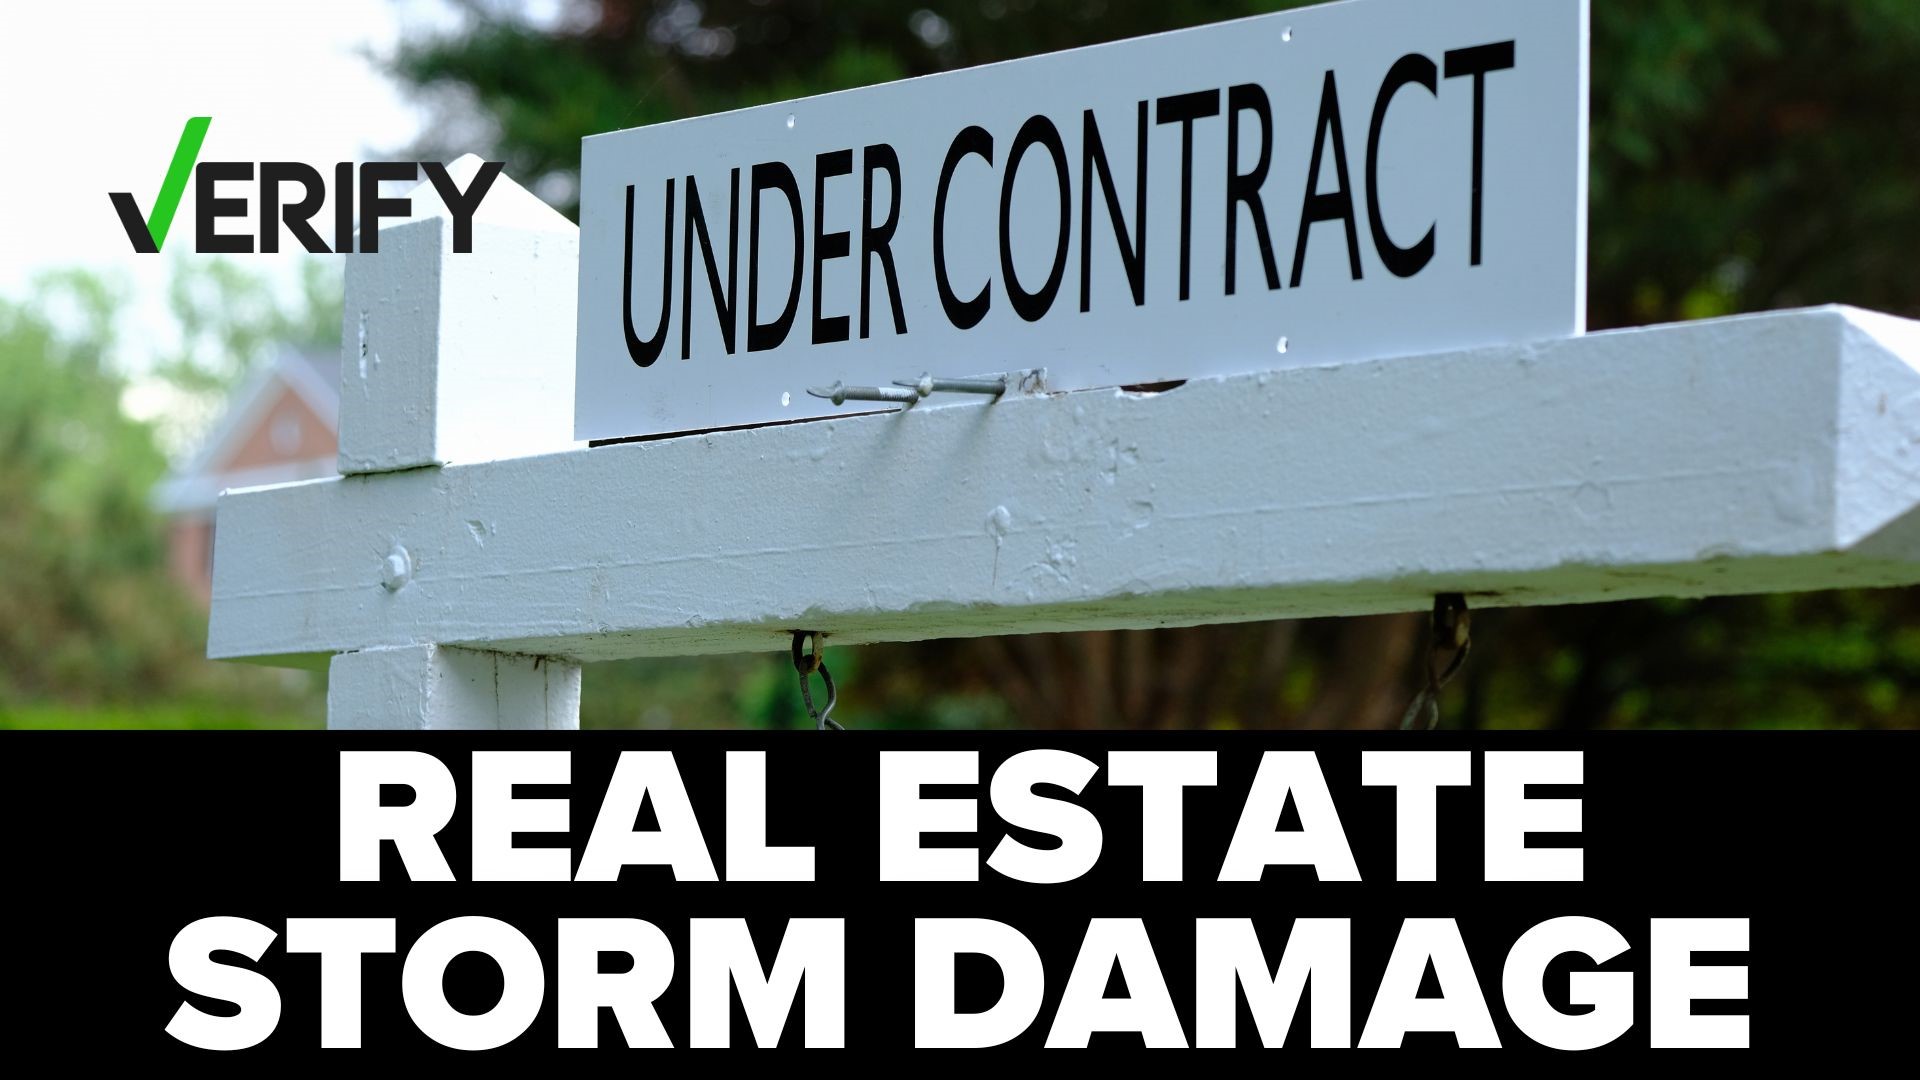 Hurricane destroyed hundreds of homes in its path, but if you have a home under contract, who's responsible for the damage?